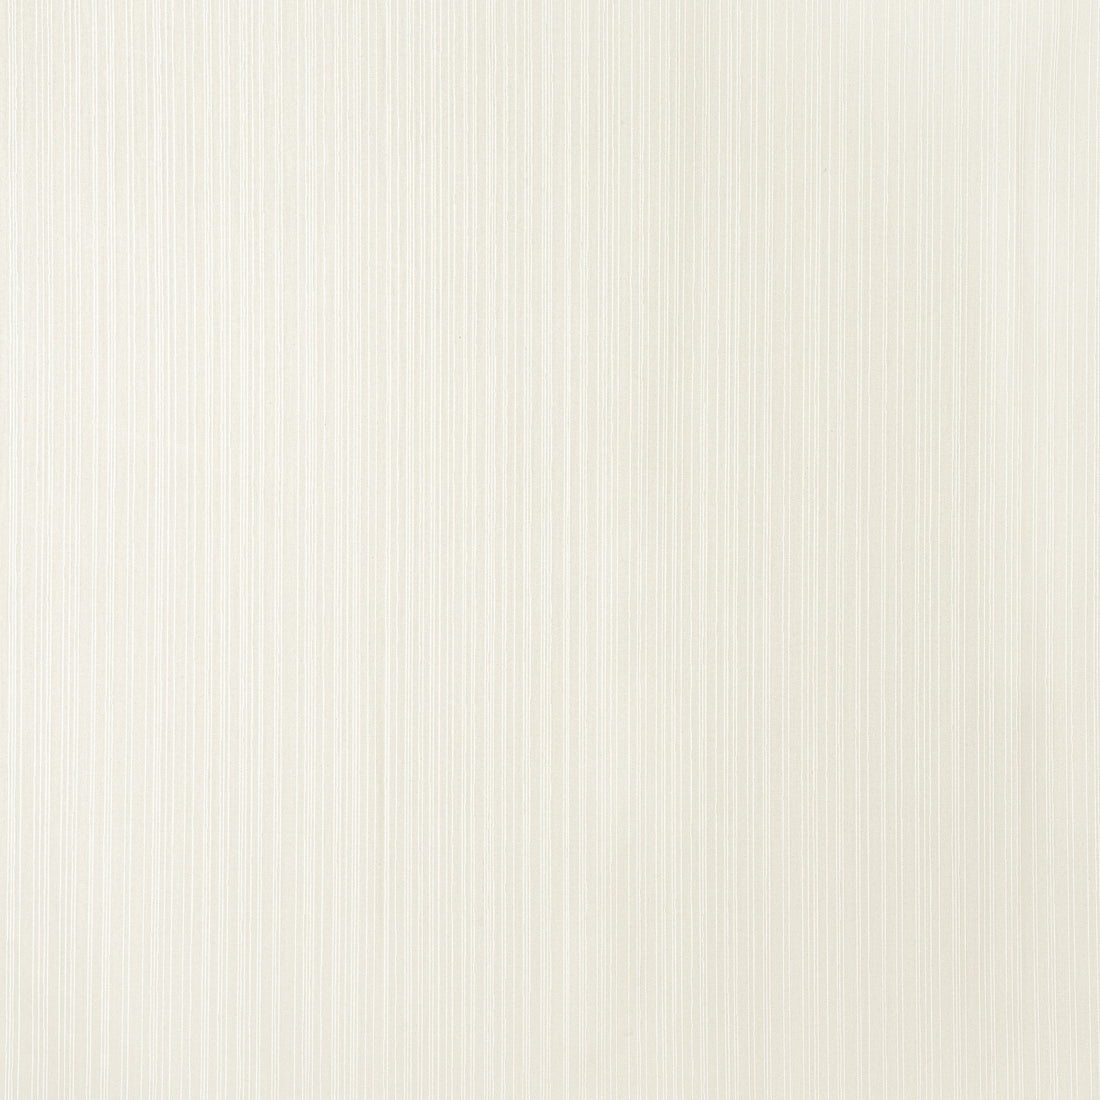 Estelle fabric in linen color - pattern number FWW8259 - by Thibaut in the Aura collection